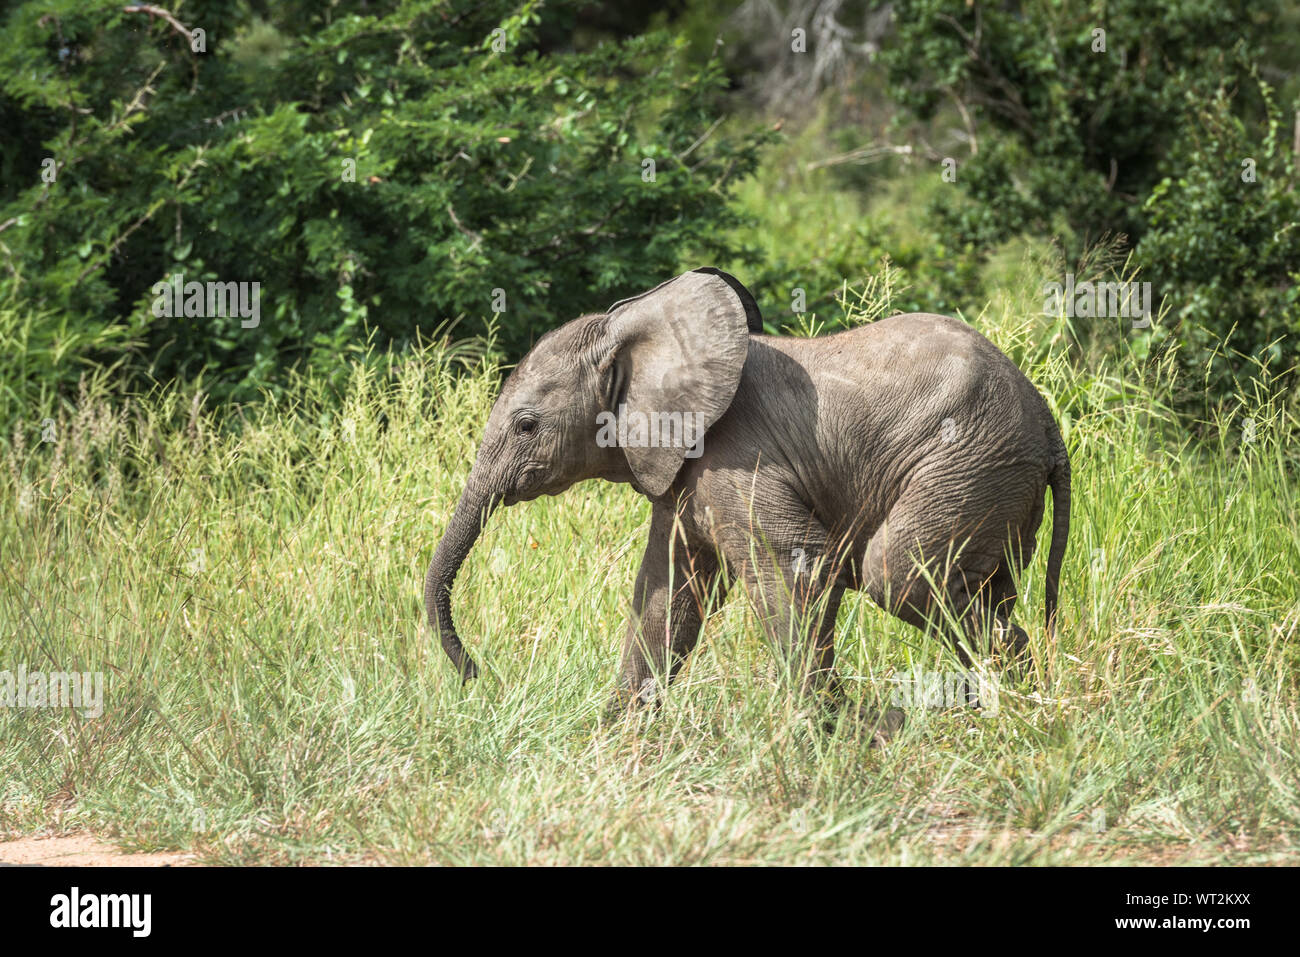 Young African Elephant in Kruger Park, South Africa Stock Photo - Alamy